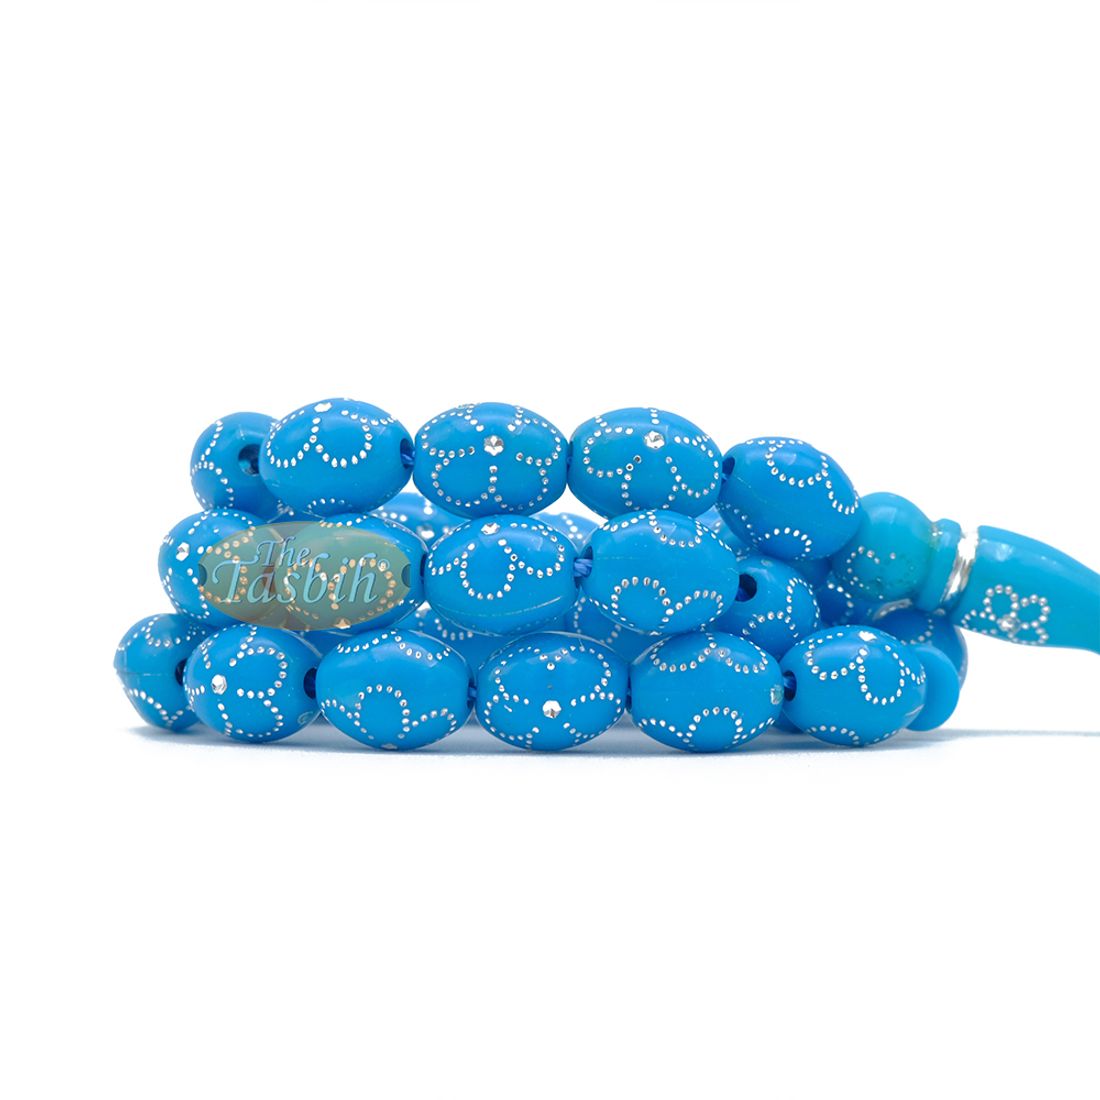 Large Turquoise Tasbih 11×14-mm Plastic Resin Electroplated Silver-tone Flower Design 33-ct Prayer Dhikr Beads